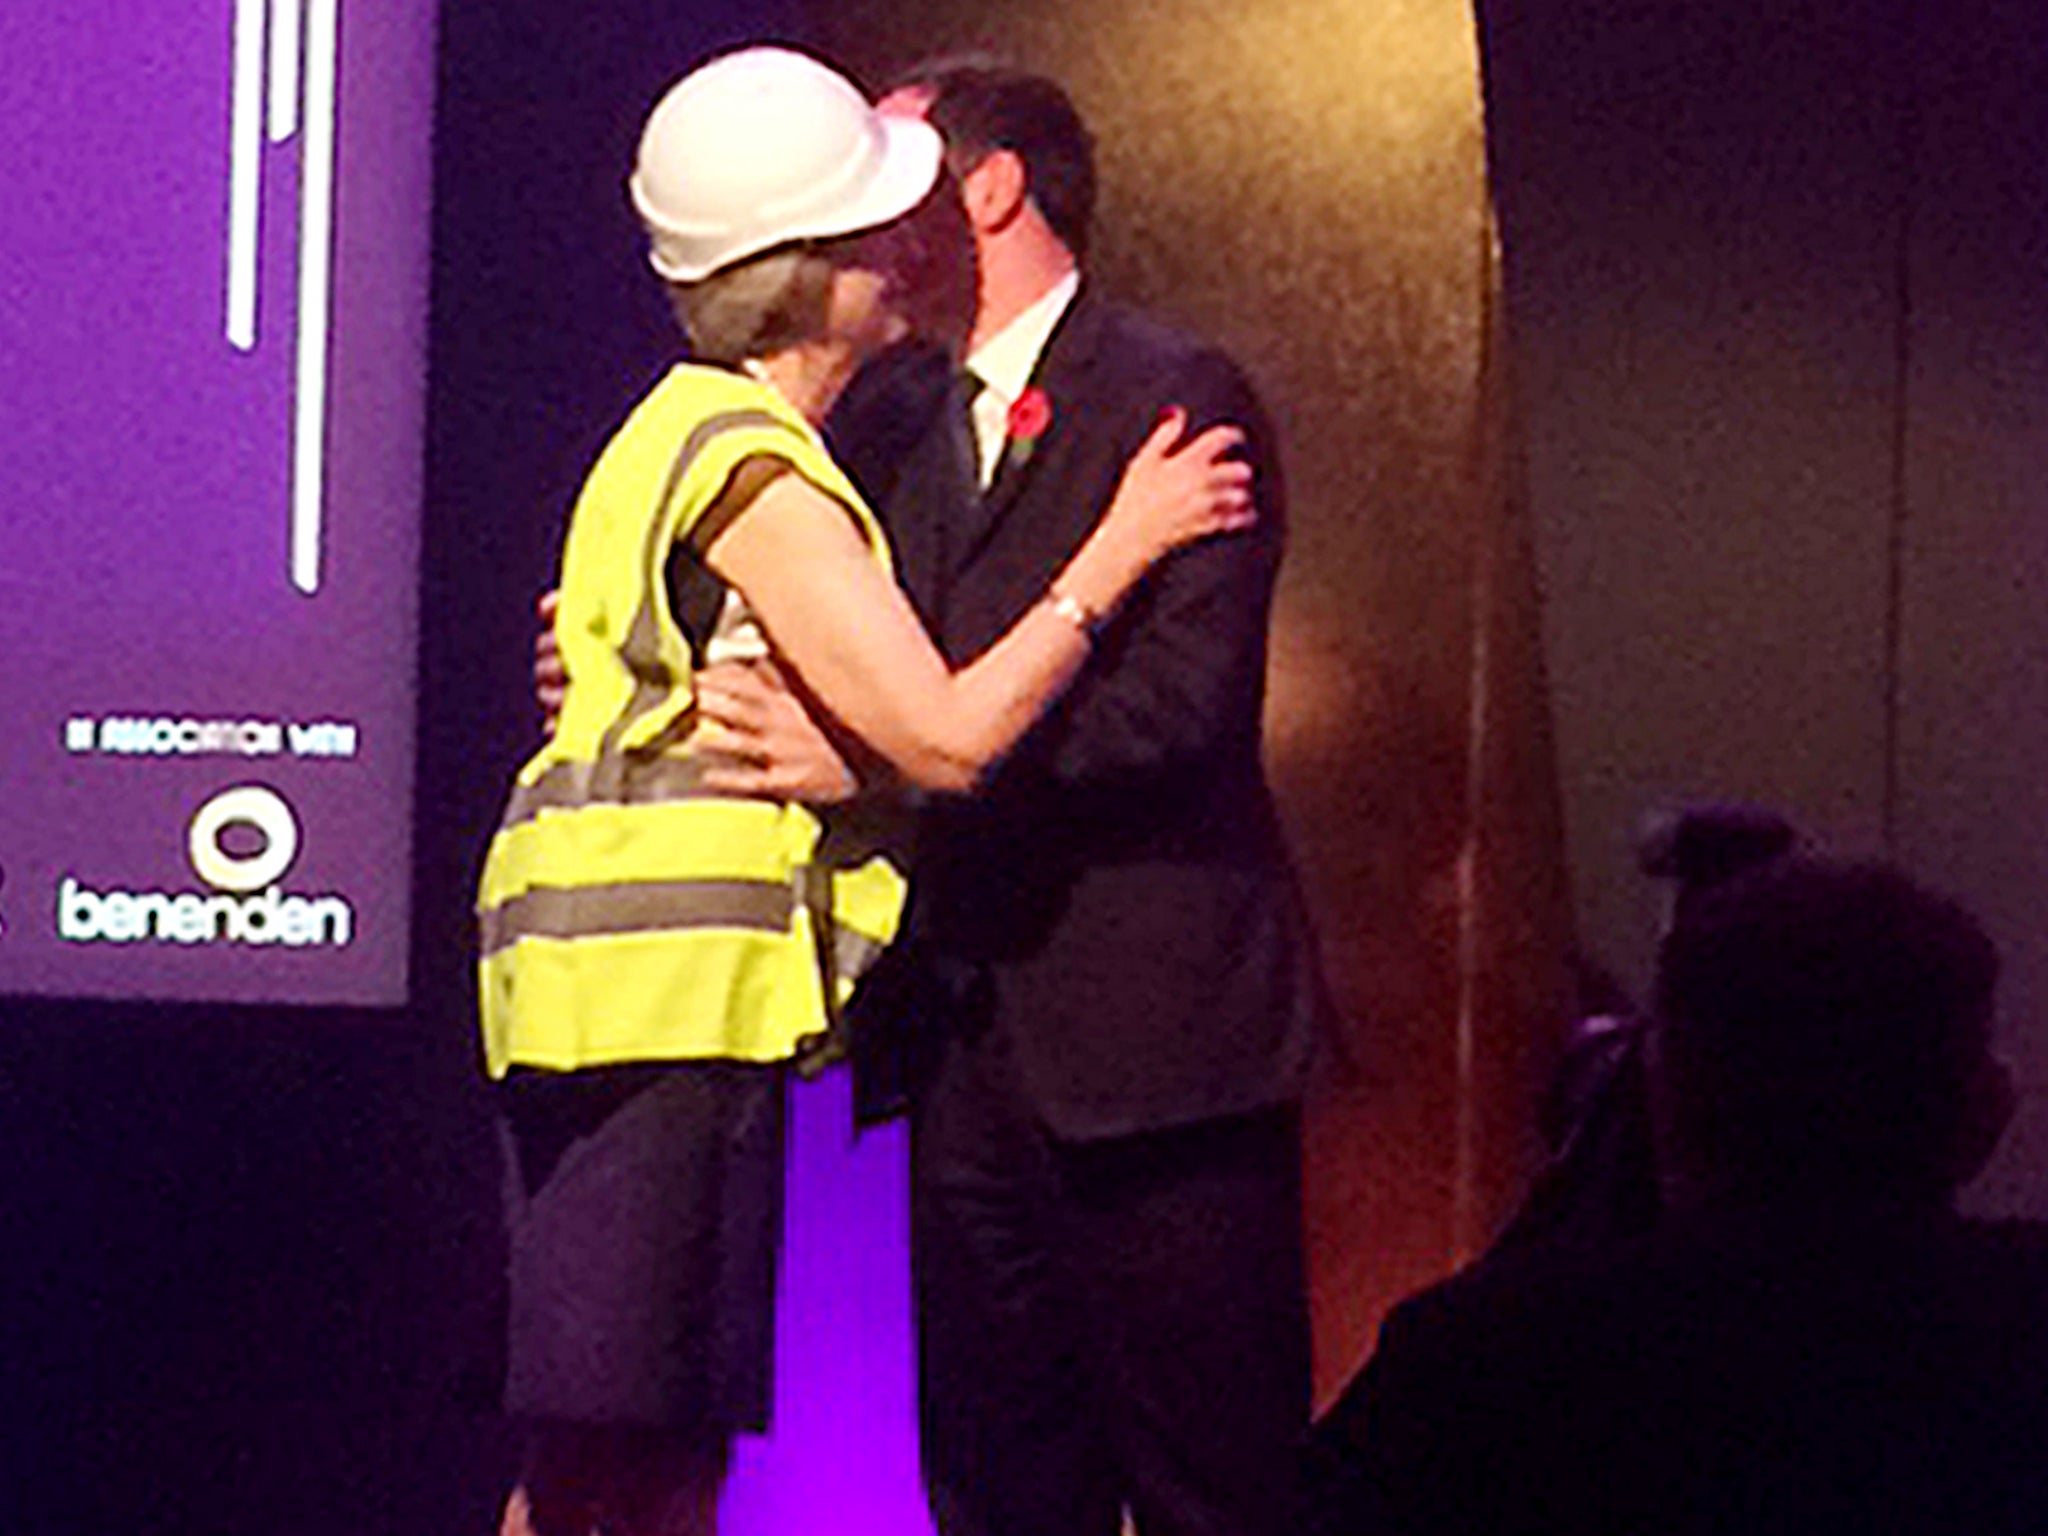 Prime Minister Theresa May who appeared to mock George Osborne by accepting an award from the former chancellor wearing a high-visibility jacket and hard hat